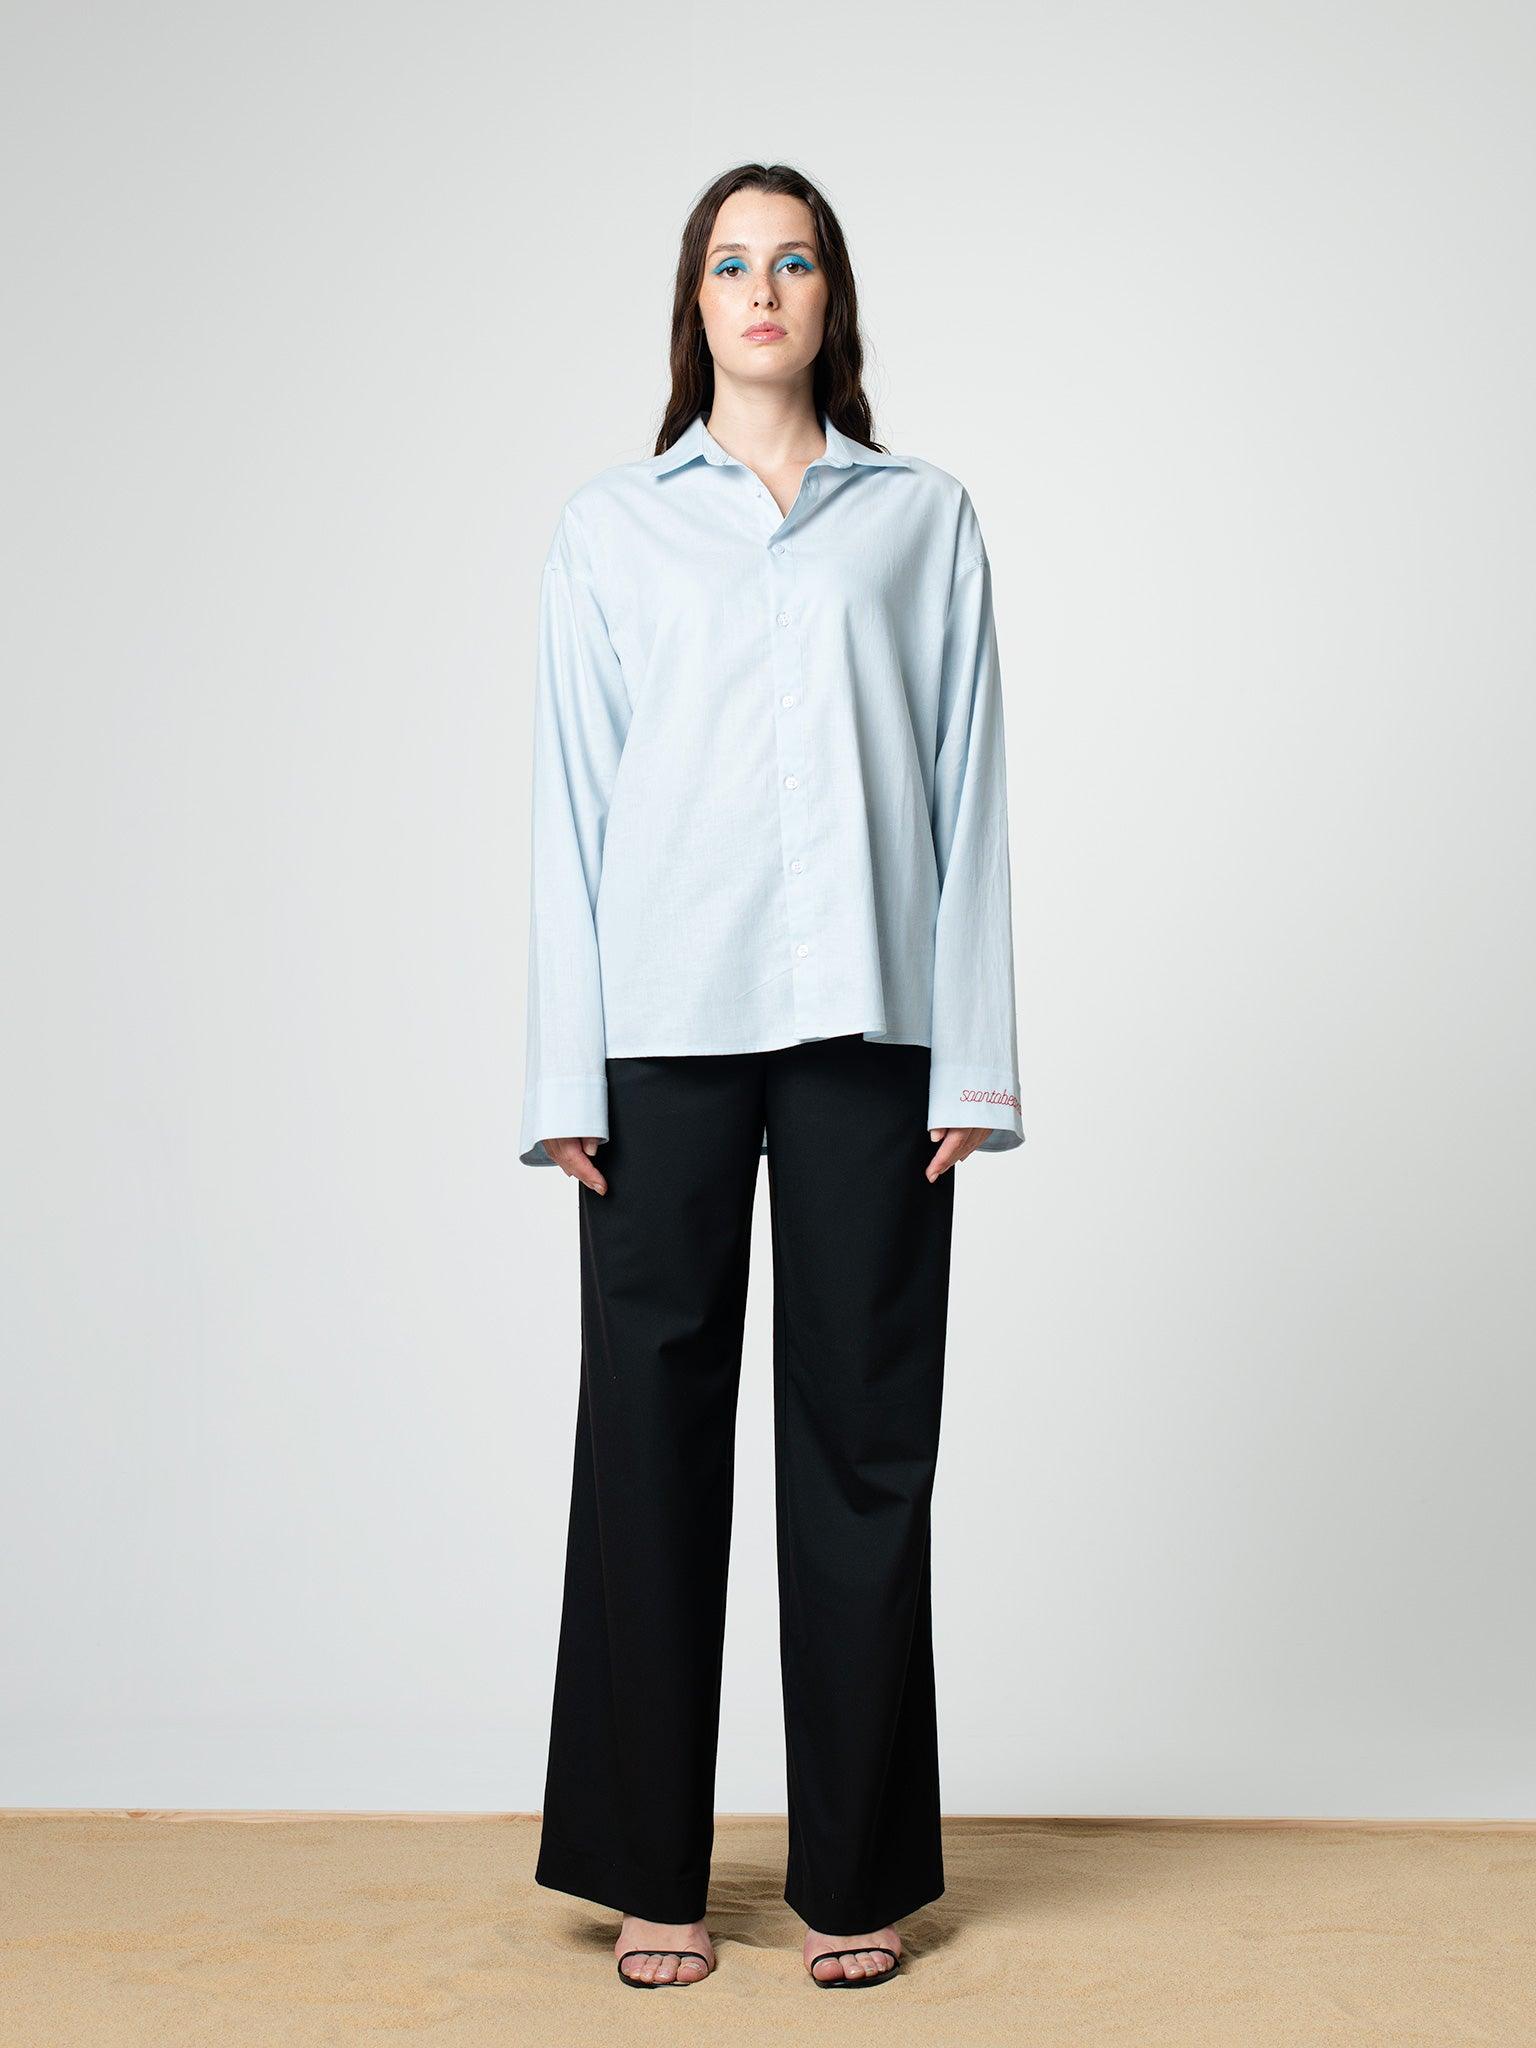 Riviera Linen Shirt - SOON TO BE ANNOUNCED